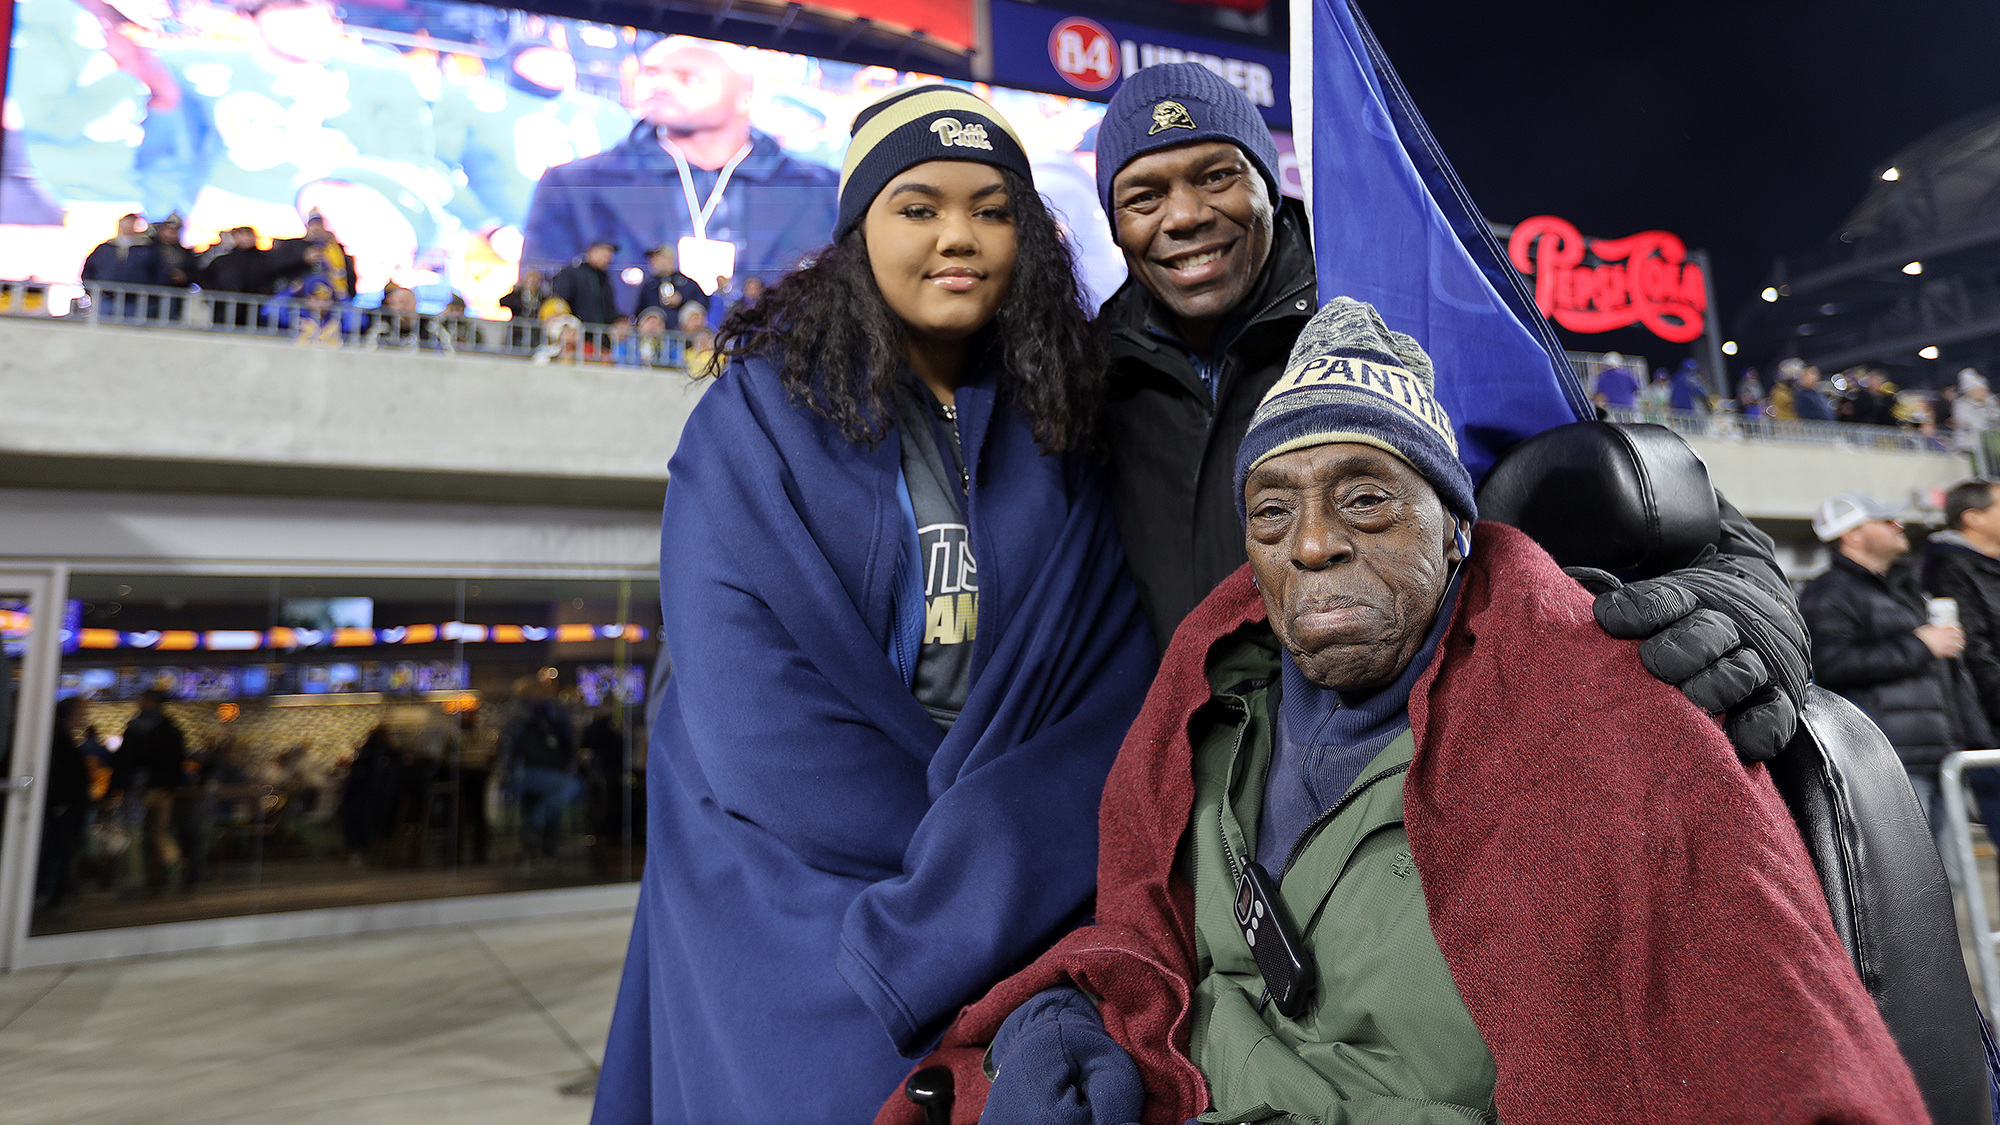 Camille, Rob Jr. and Rob Grier Sr. attend a Penn State football game. Rob Sr. broke the color barrier at the Sugar Bowl when he played for the team. VINO WONG/SKY BLOSSOM FILMS